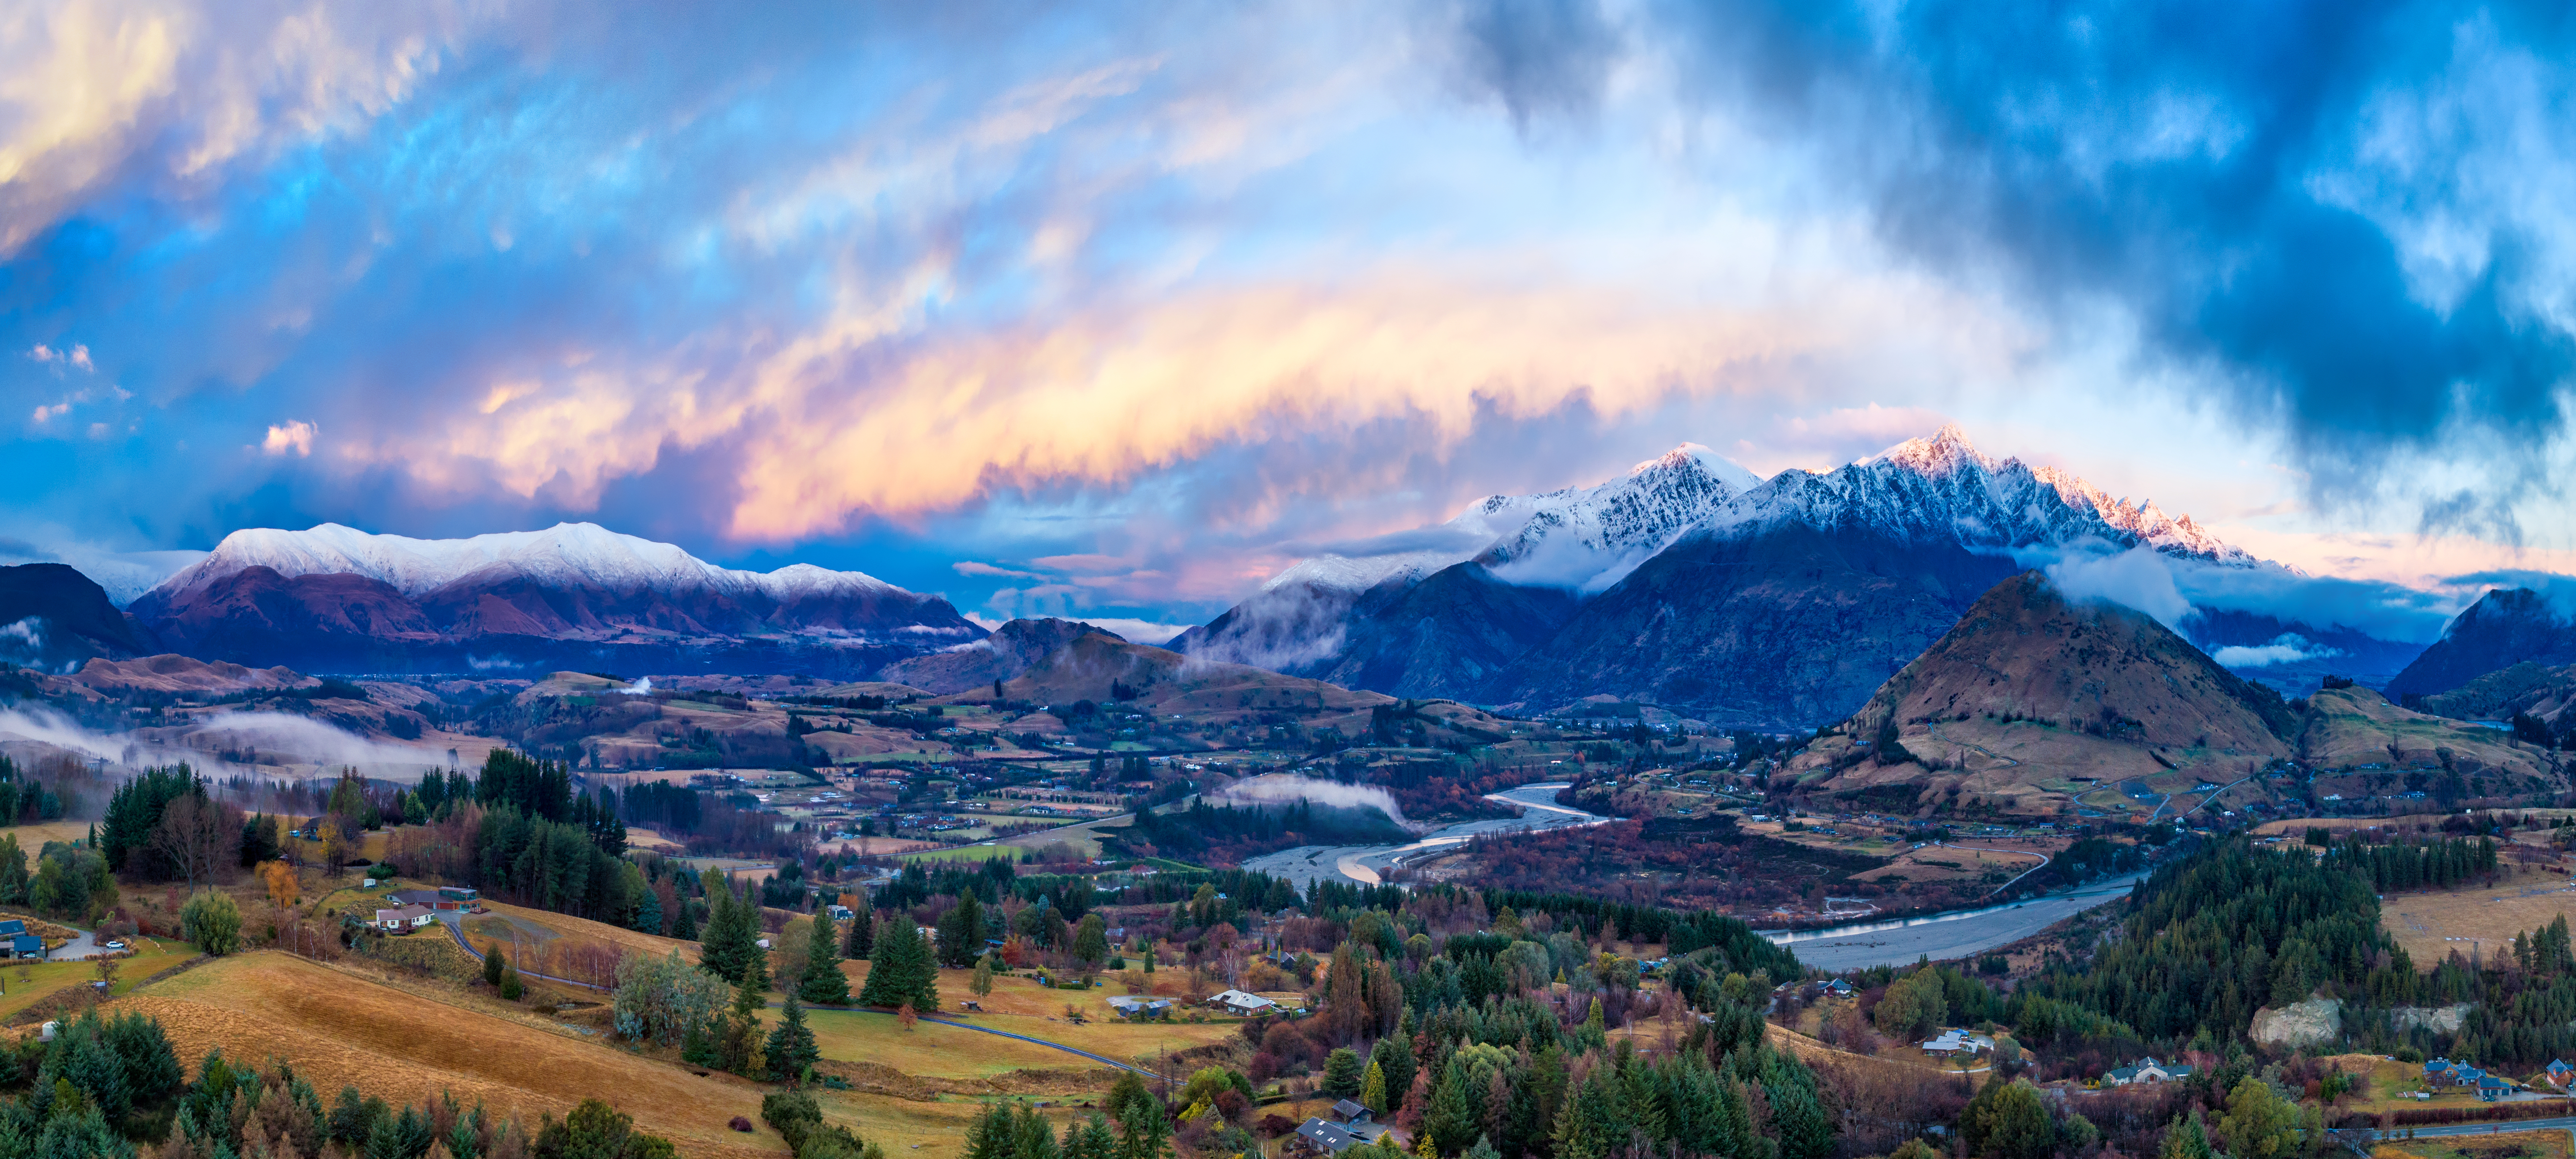 Cloud Fall Mountain Panorama Queenstown New Zealand South Island New Zealand Southern Alps 7890x3550